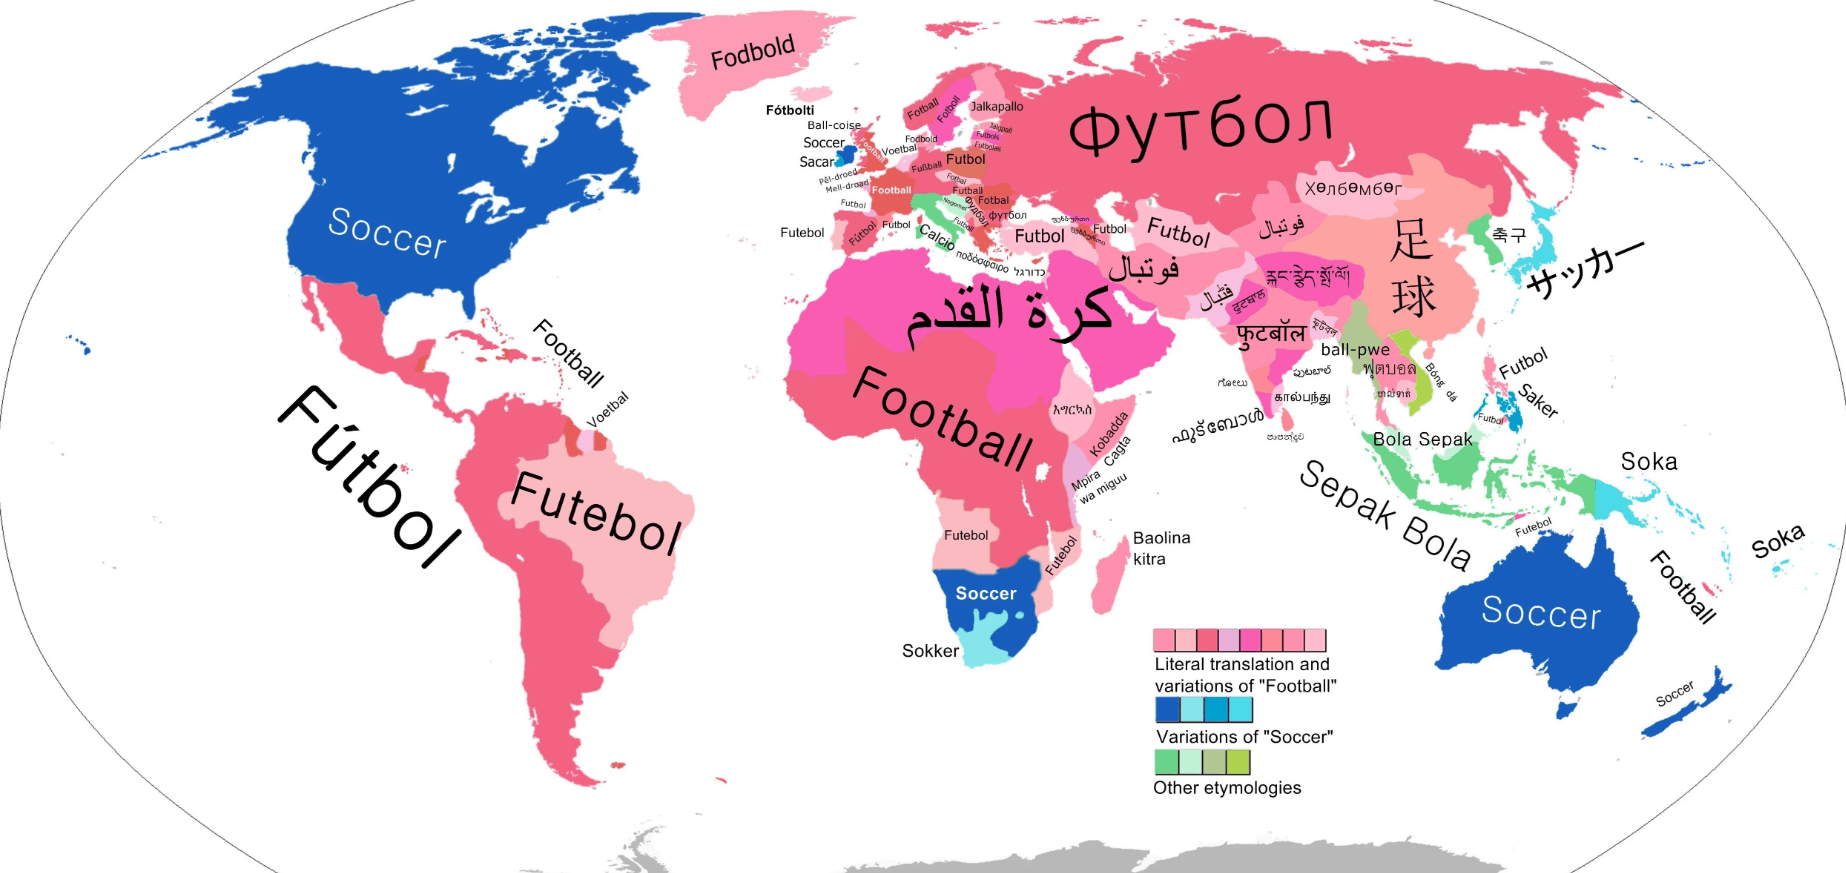 What countries call football soccer